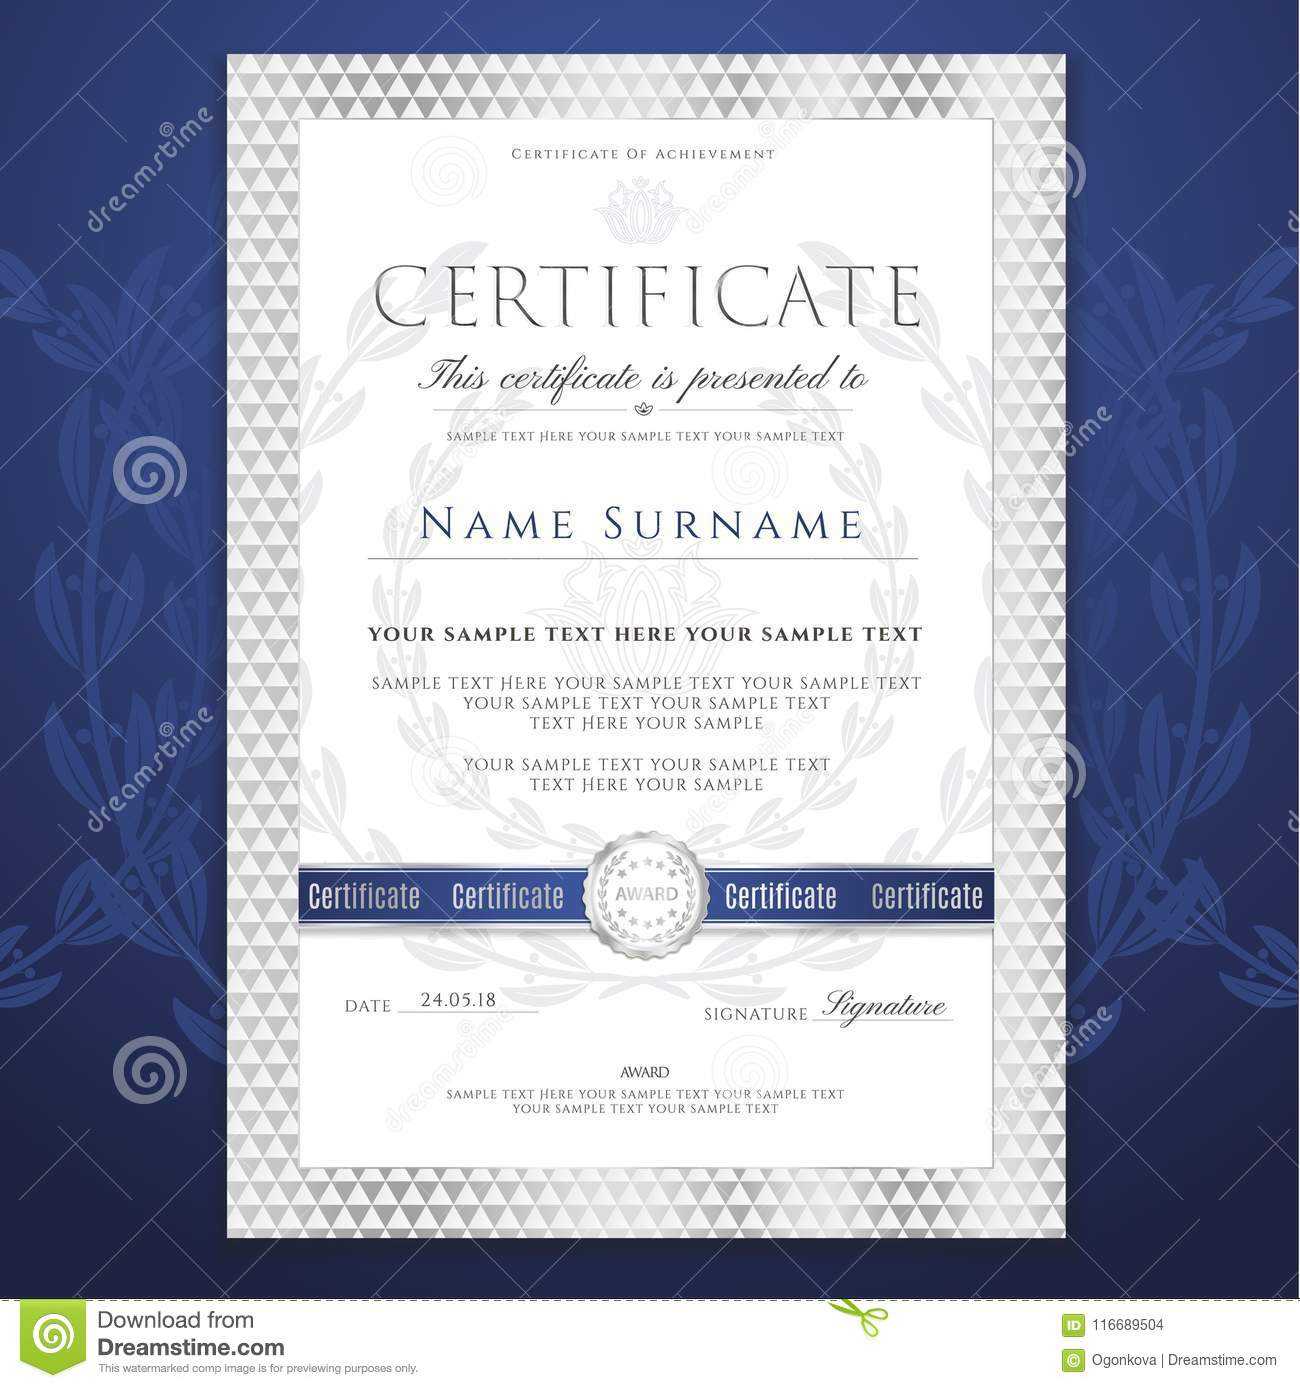 Certificate Template. Printable / Editable Design For Within Sample Award Certificates Templates